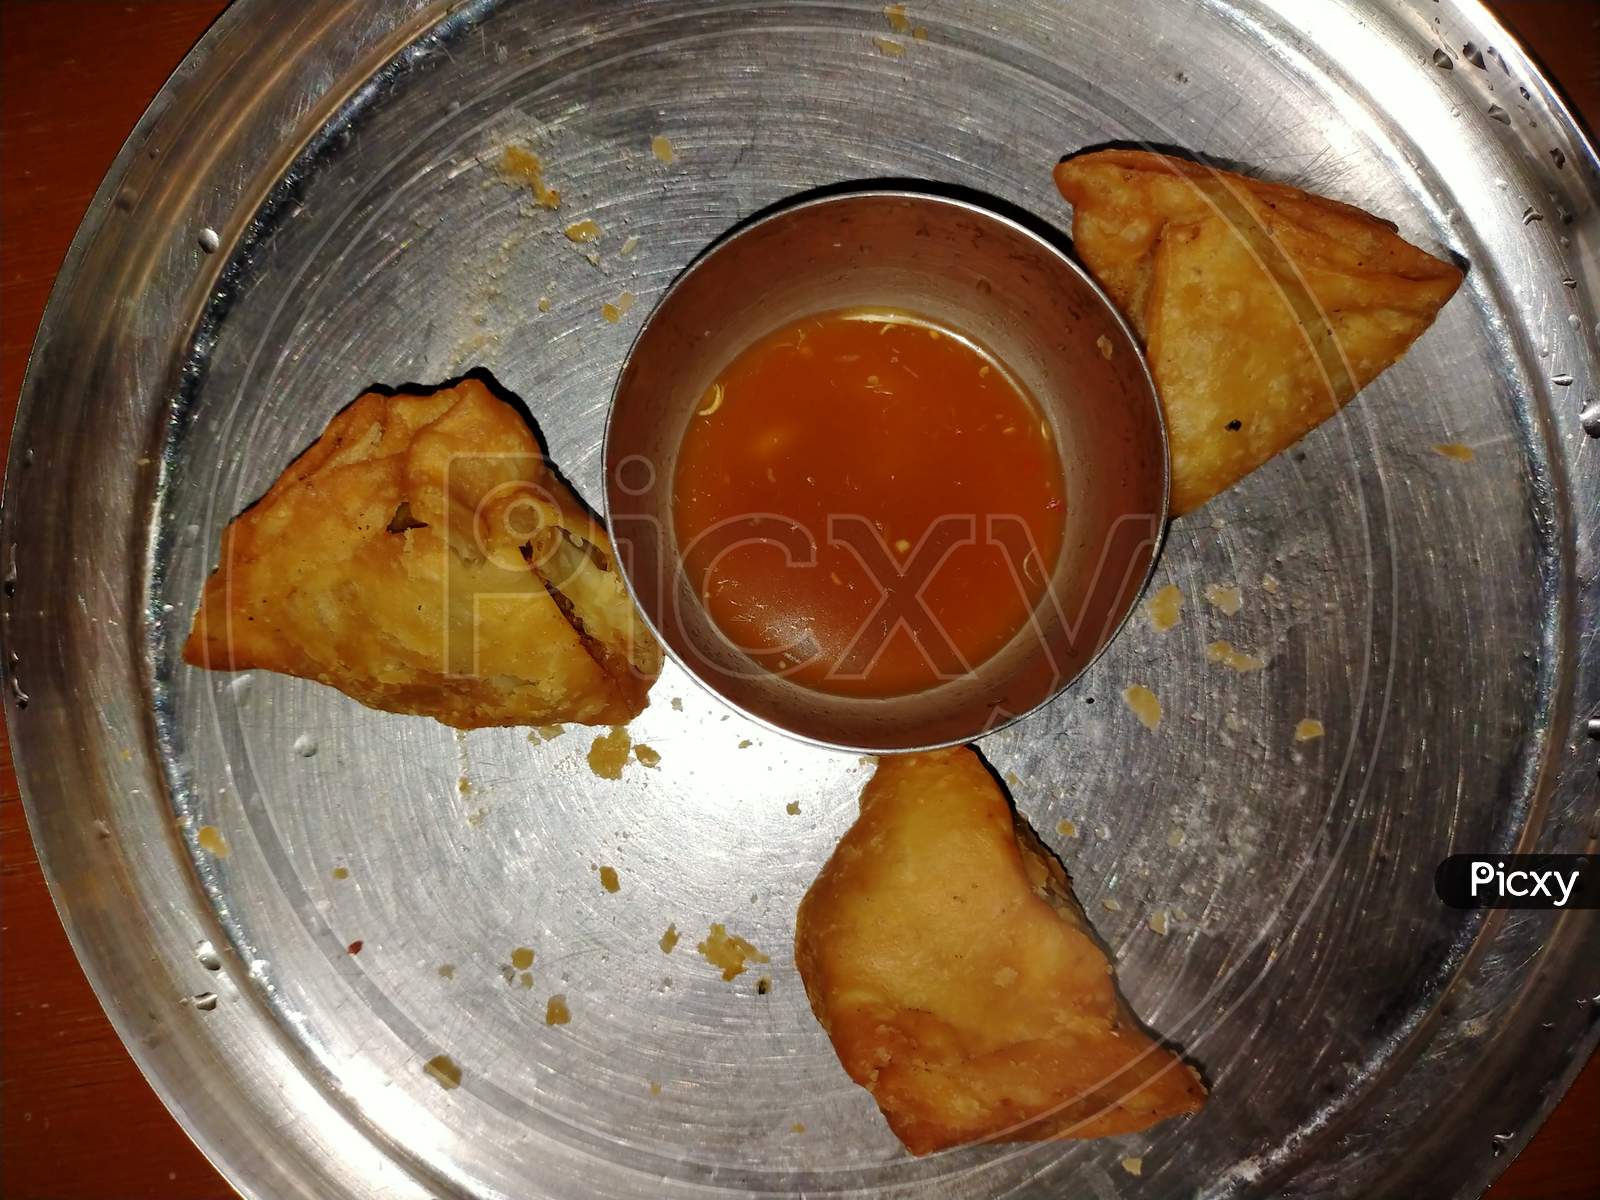 Samosa and chutney in a plate with black and grey background